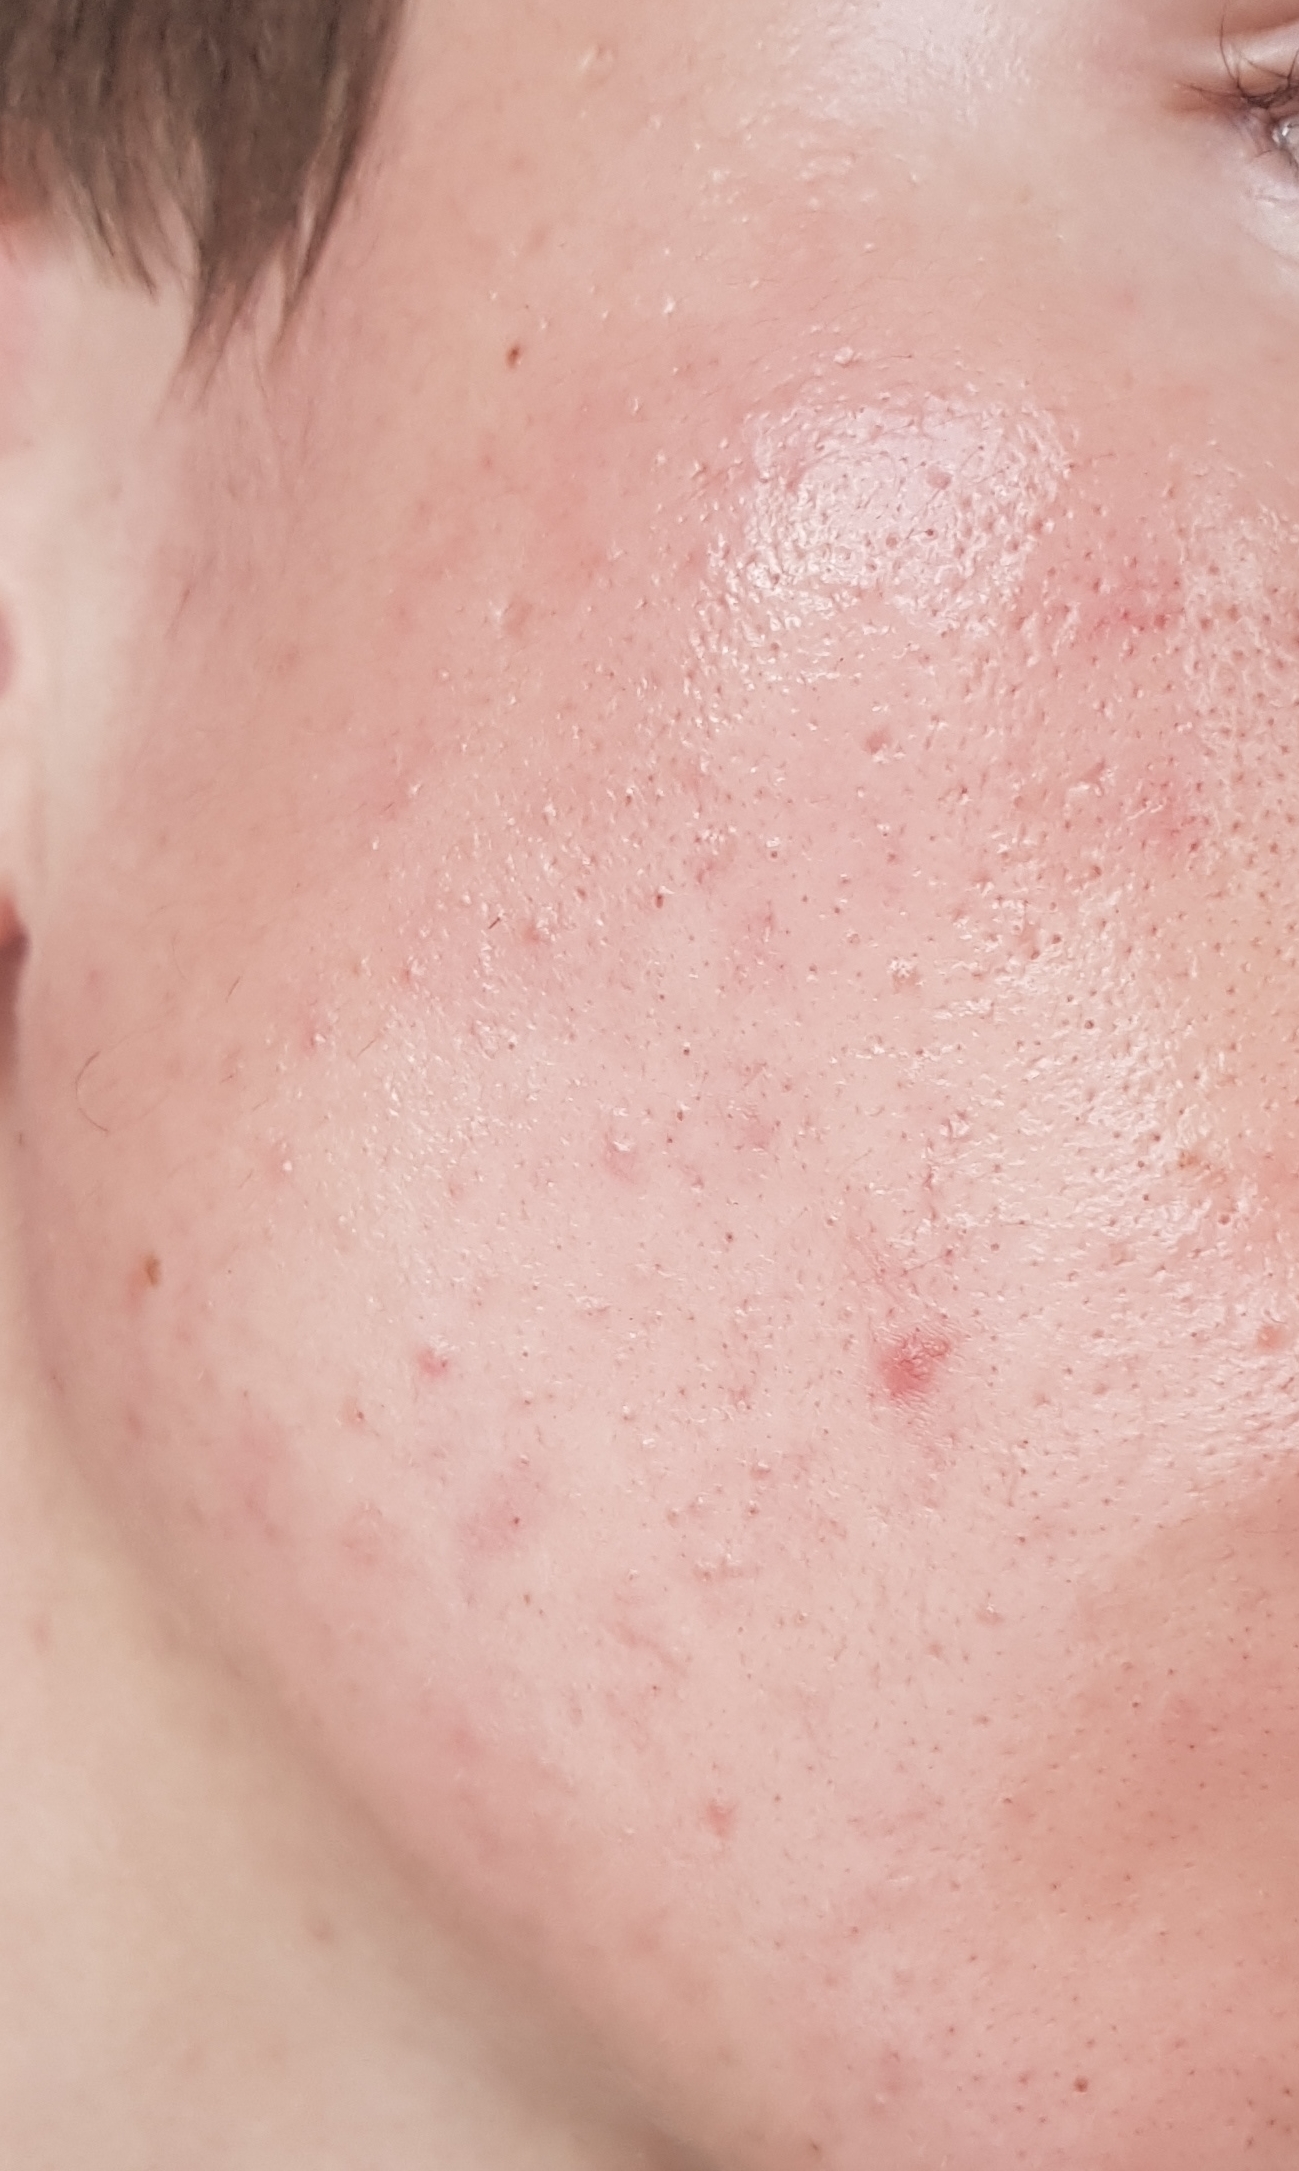 "Post"moderate acne Scars/Hyperpigmentation ...